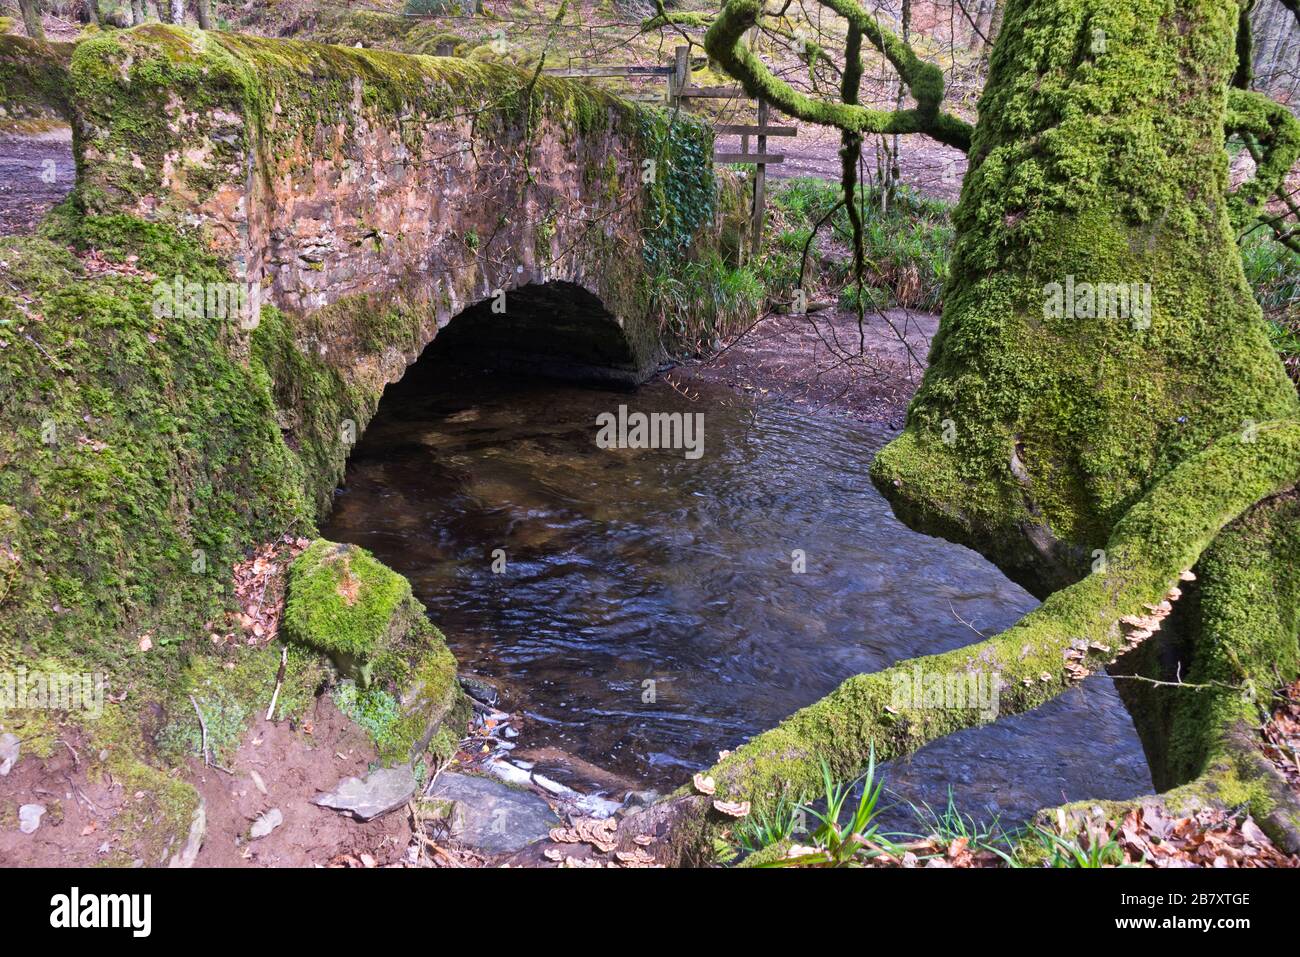 the meeting of Danes Brook and River Barle at Castle Bridge on the Exe Valley Way just west of Dulverton in the Exmoor National Park, England, UK Stock Photo